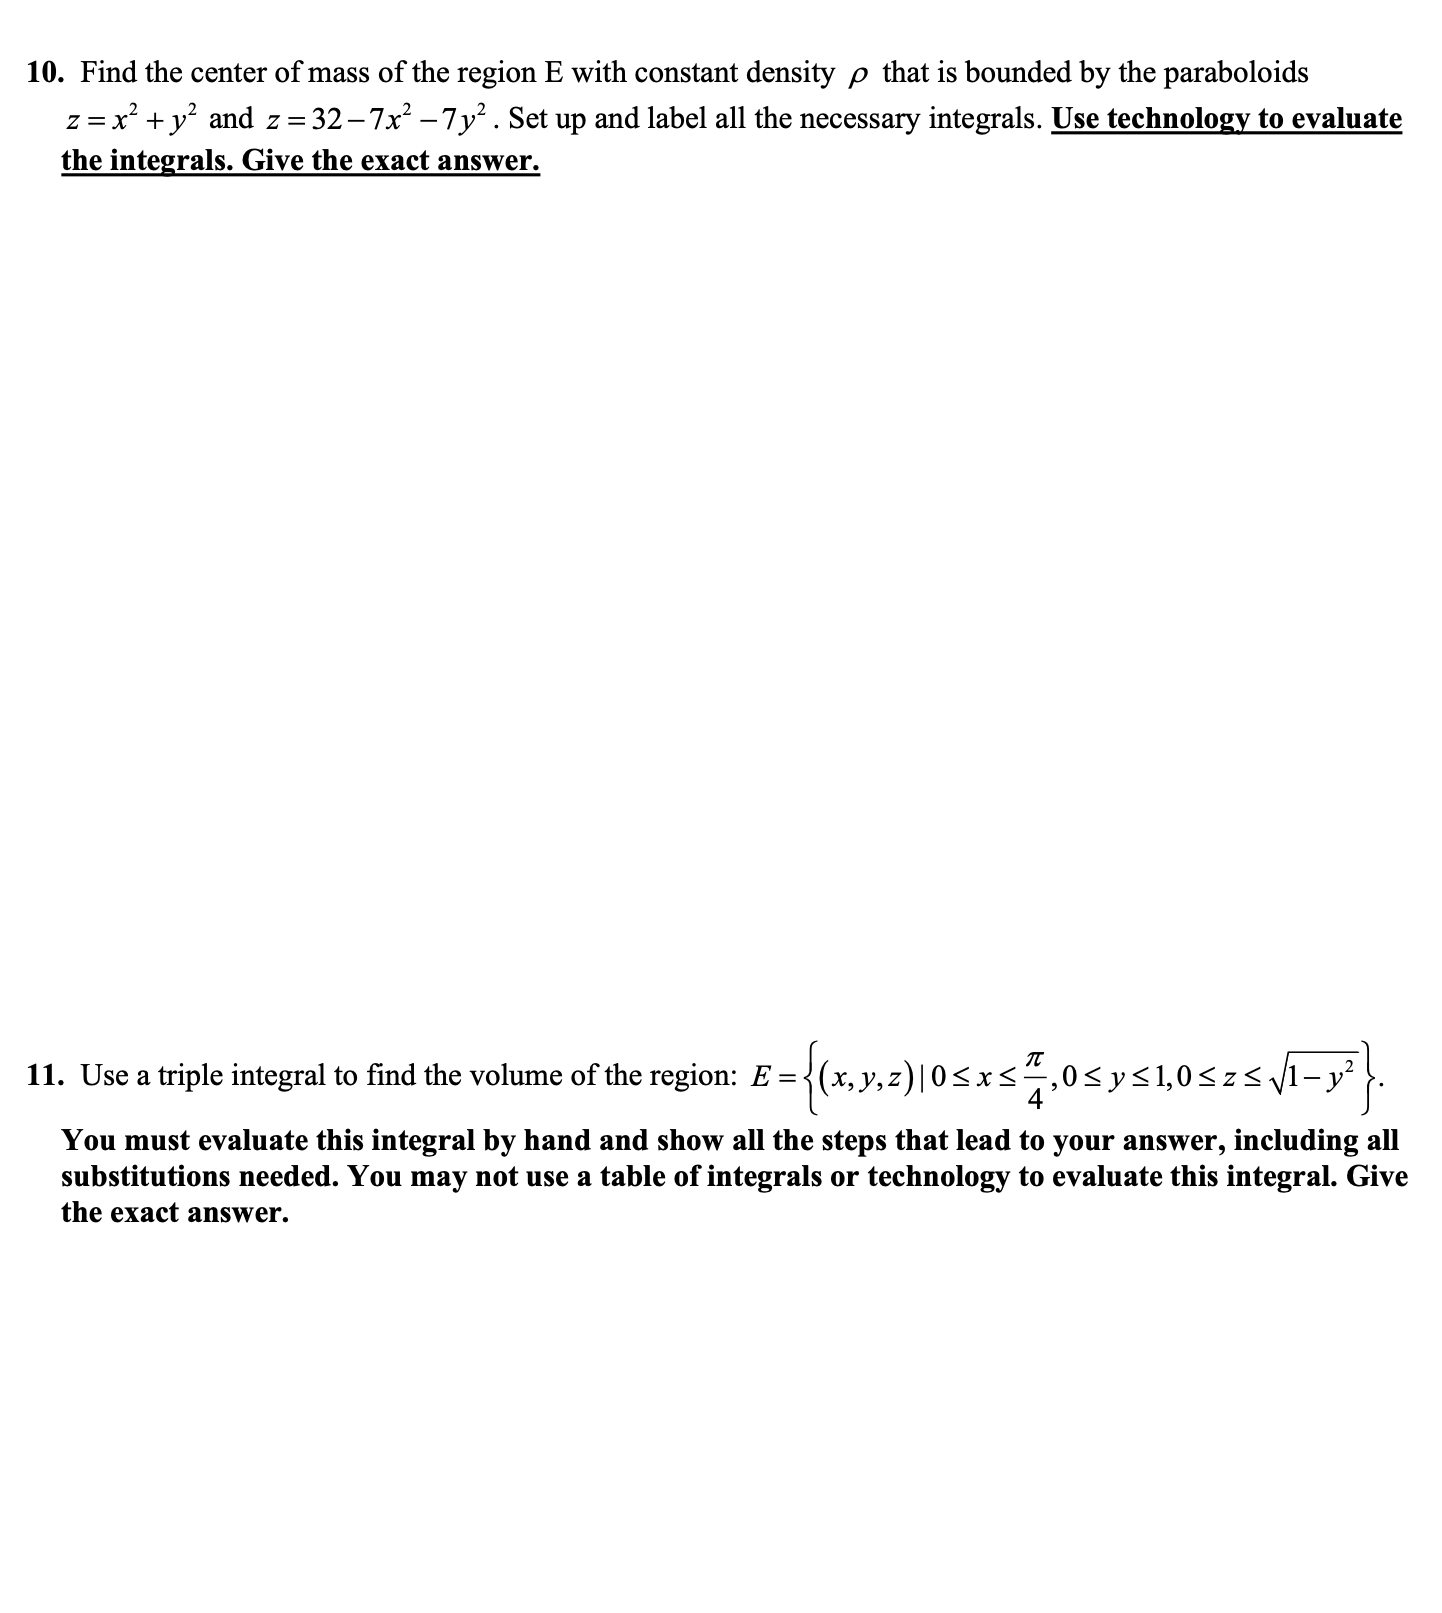 Use a triple integral to find the volume of the region: E ={(x,y,z)|0<xs“,0<y<1,0<zs V1-y²
4
You must evaluate this integral by hand and show all the steps that lead to your answer, including all
substitutions needed. You may not use a table of integrals or technology to evaluate this integral. Give
the exact answer.
